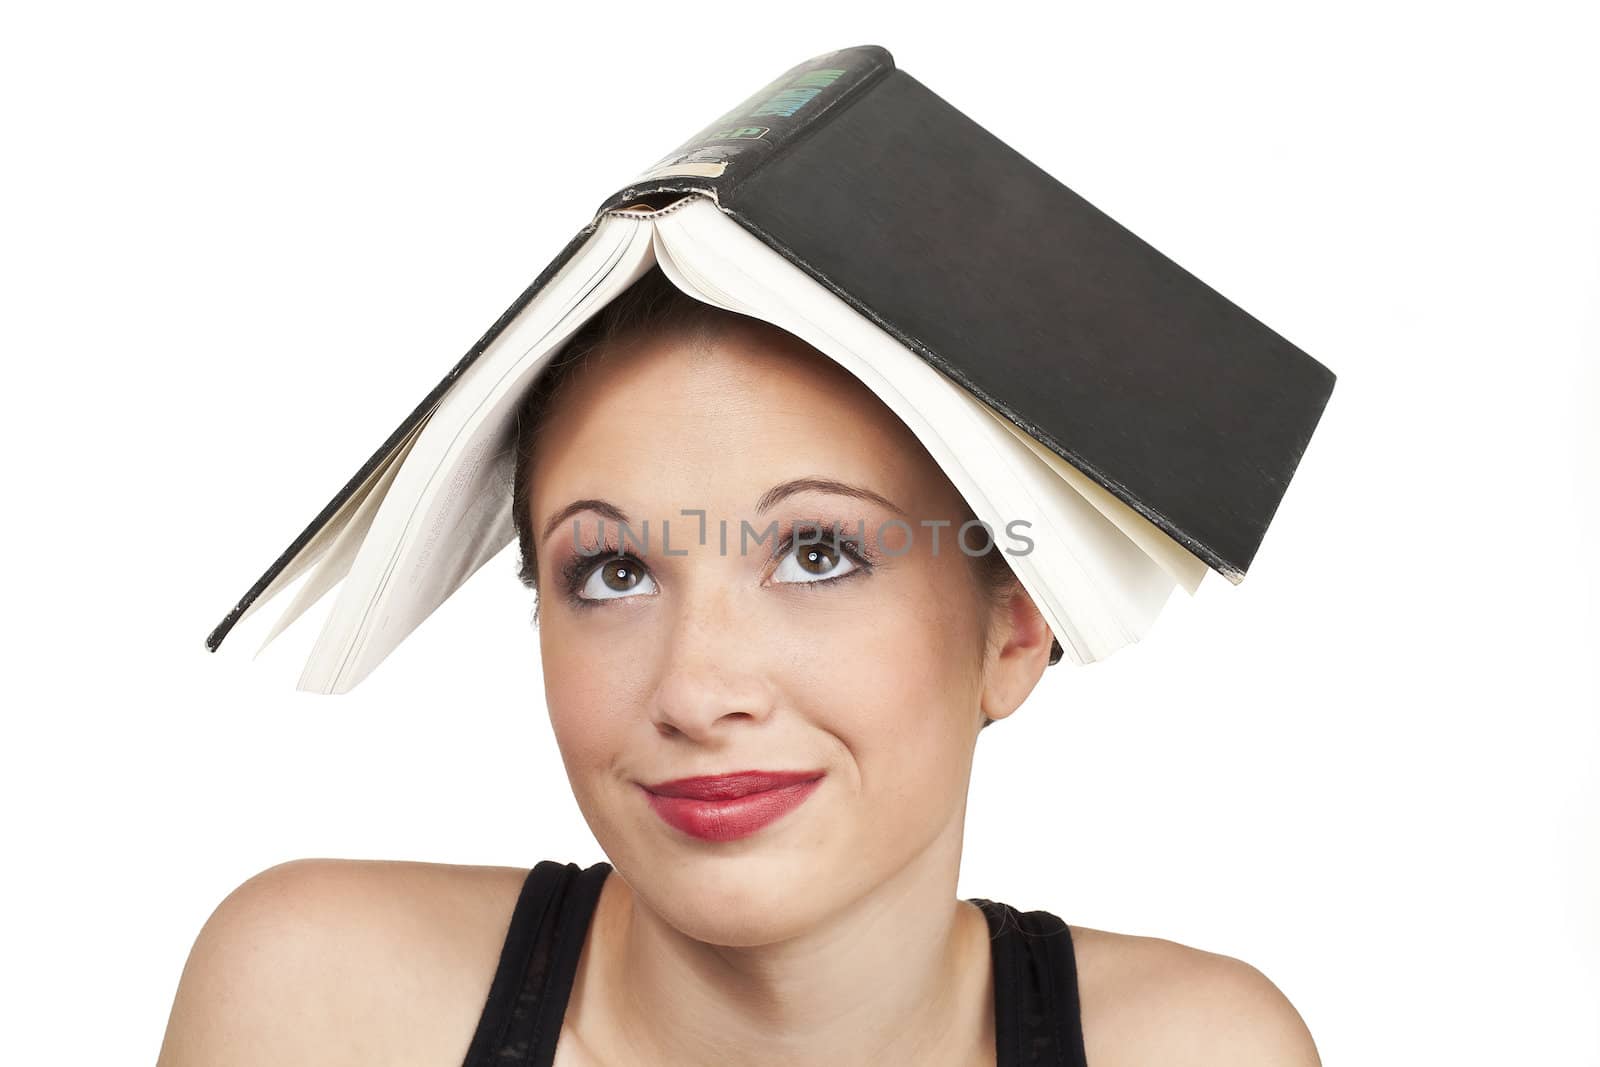 The concept shot shows a confused expression of studying.